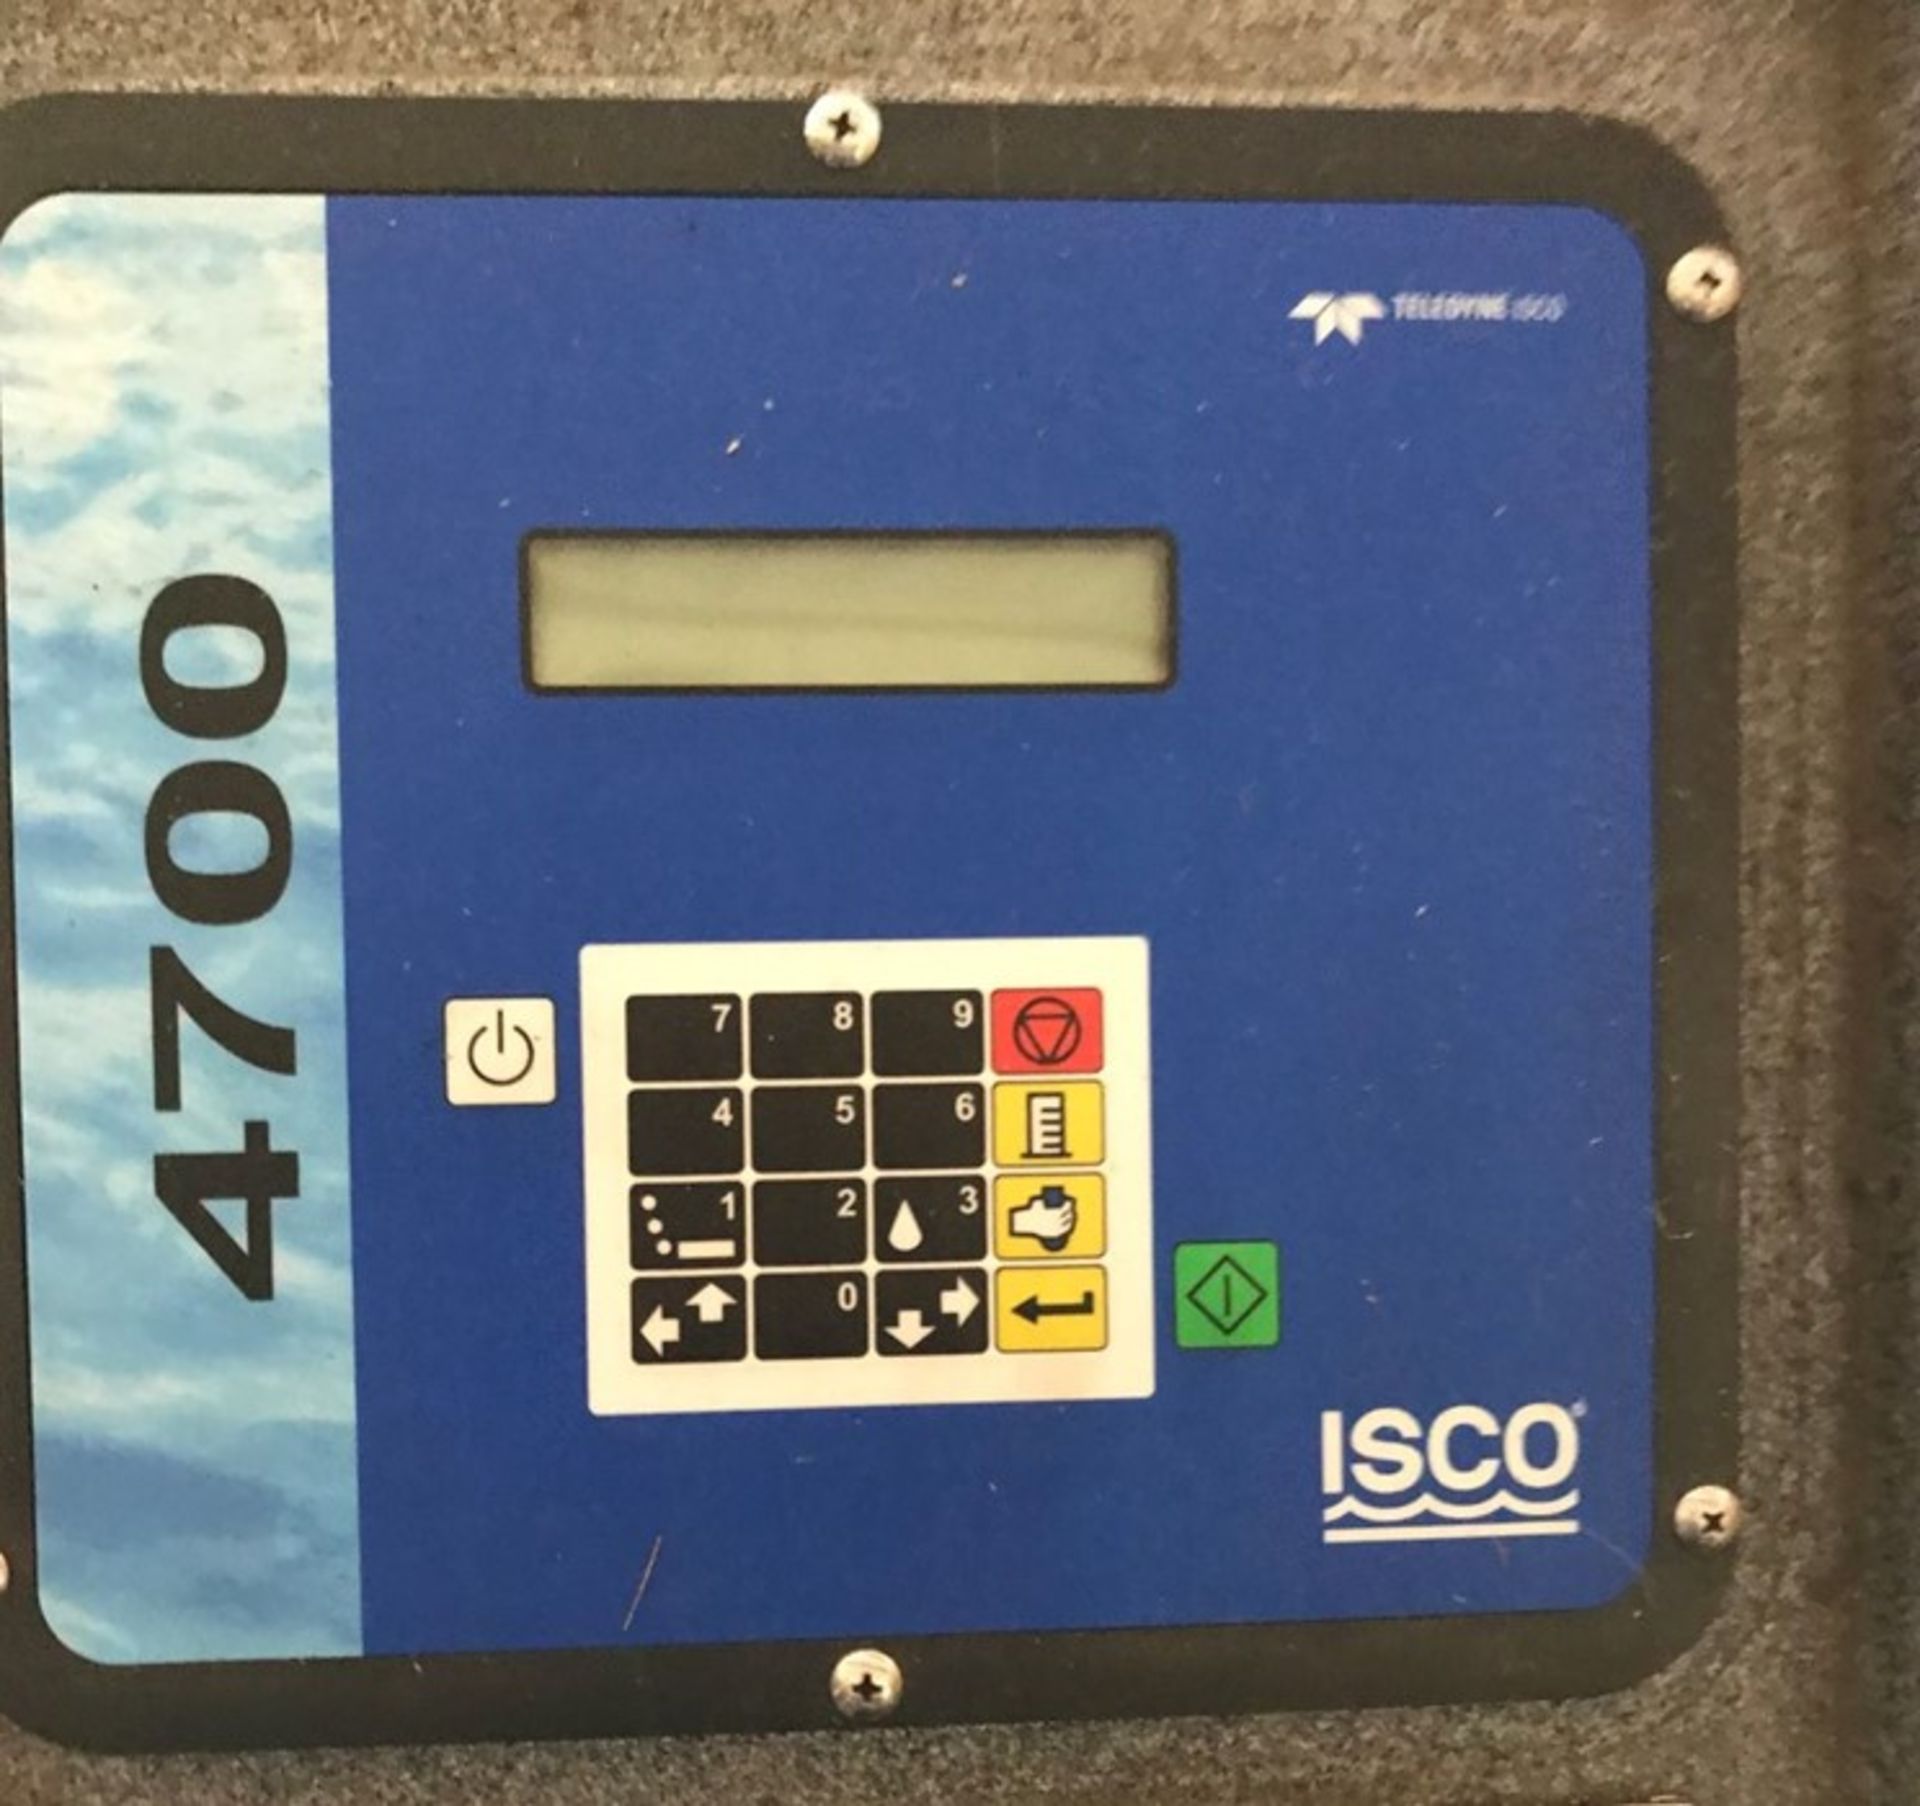 ISCO REFRIGERATED SAMPLER - Image 2 of 4